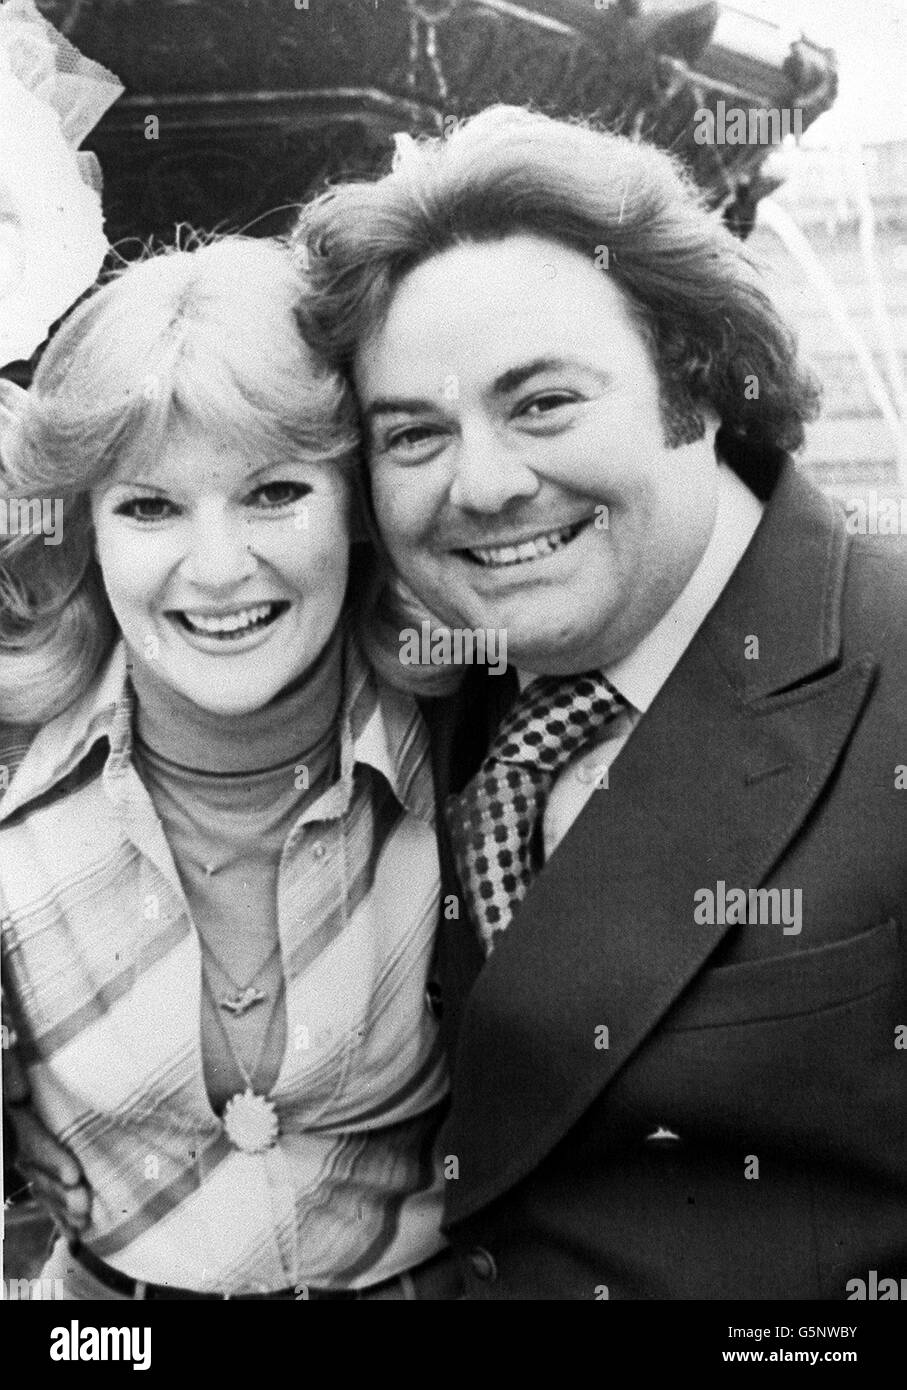 Comedian Eddie Large, of the Little and Large duo, with singer Patsy Ann Scott in Liverpool in October 1977. Eddie, 38, is quoted in newspapers this morning as having said in Blackpool that he is 'good friends' with 27 year old Patsy Ann. * He is also reported to have said that he left his home two months ago. Stock Photo